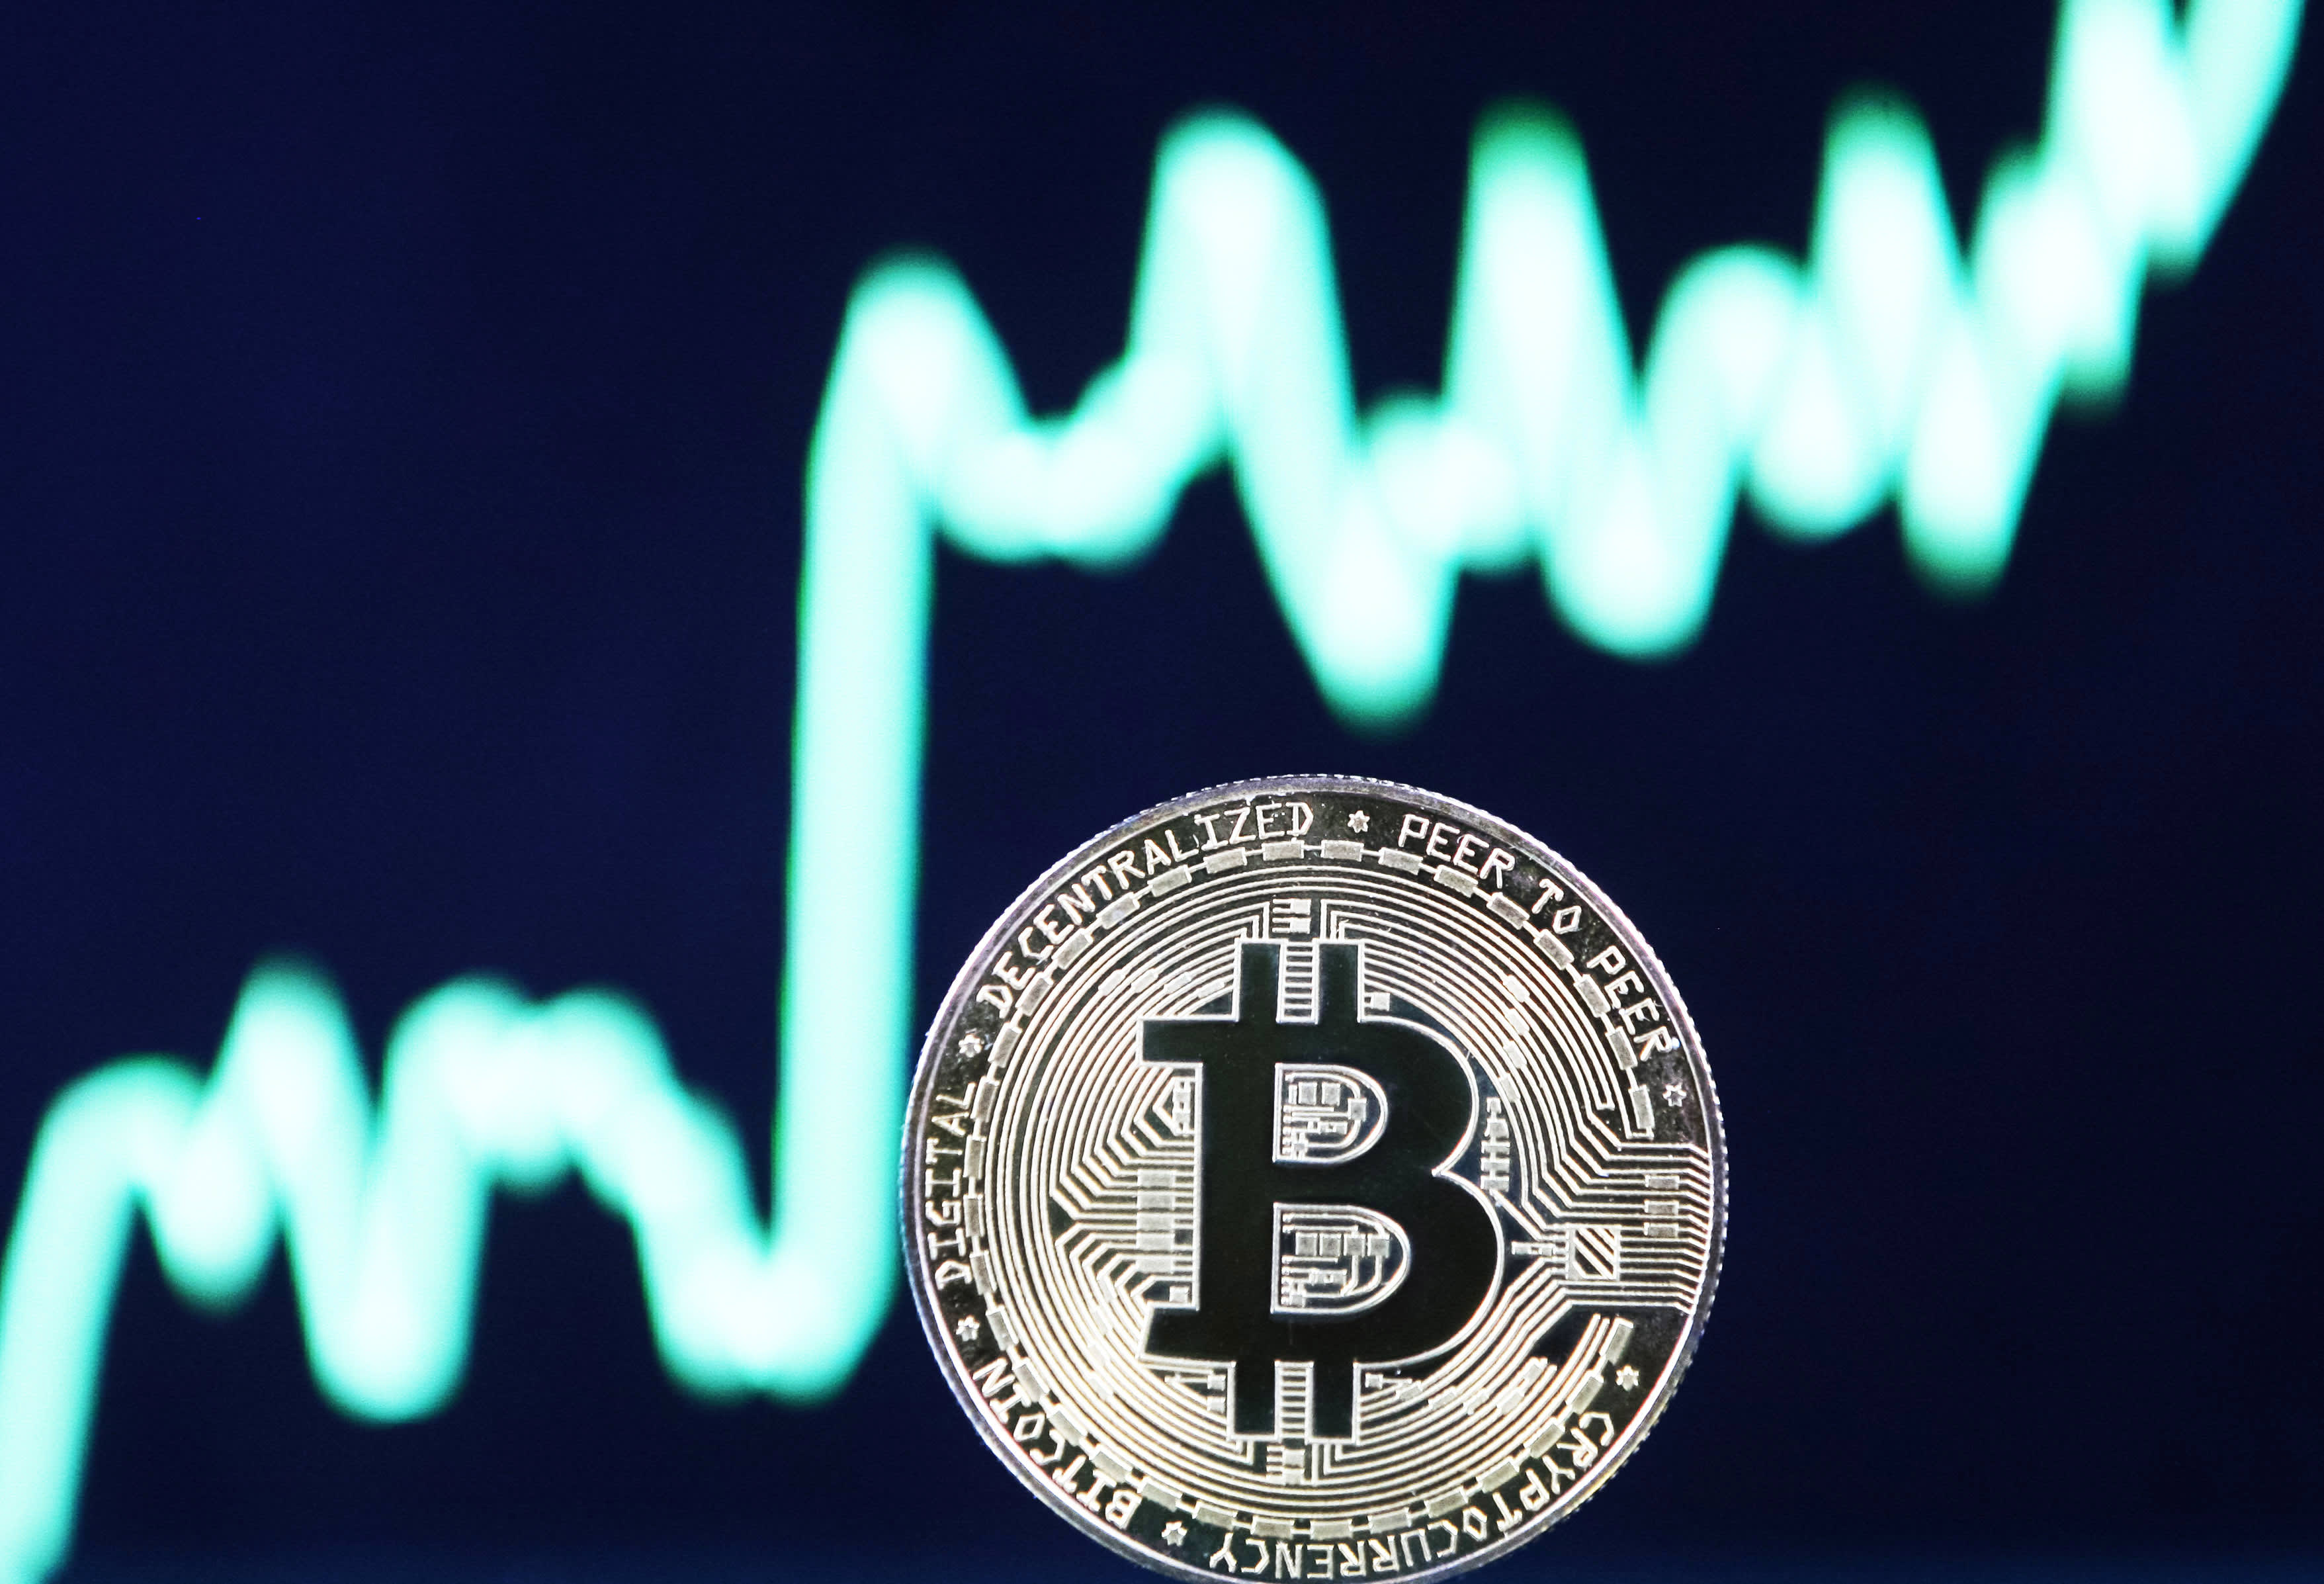 Bitcoin climbs back above $50,000 as it starts October on a tear